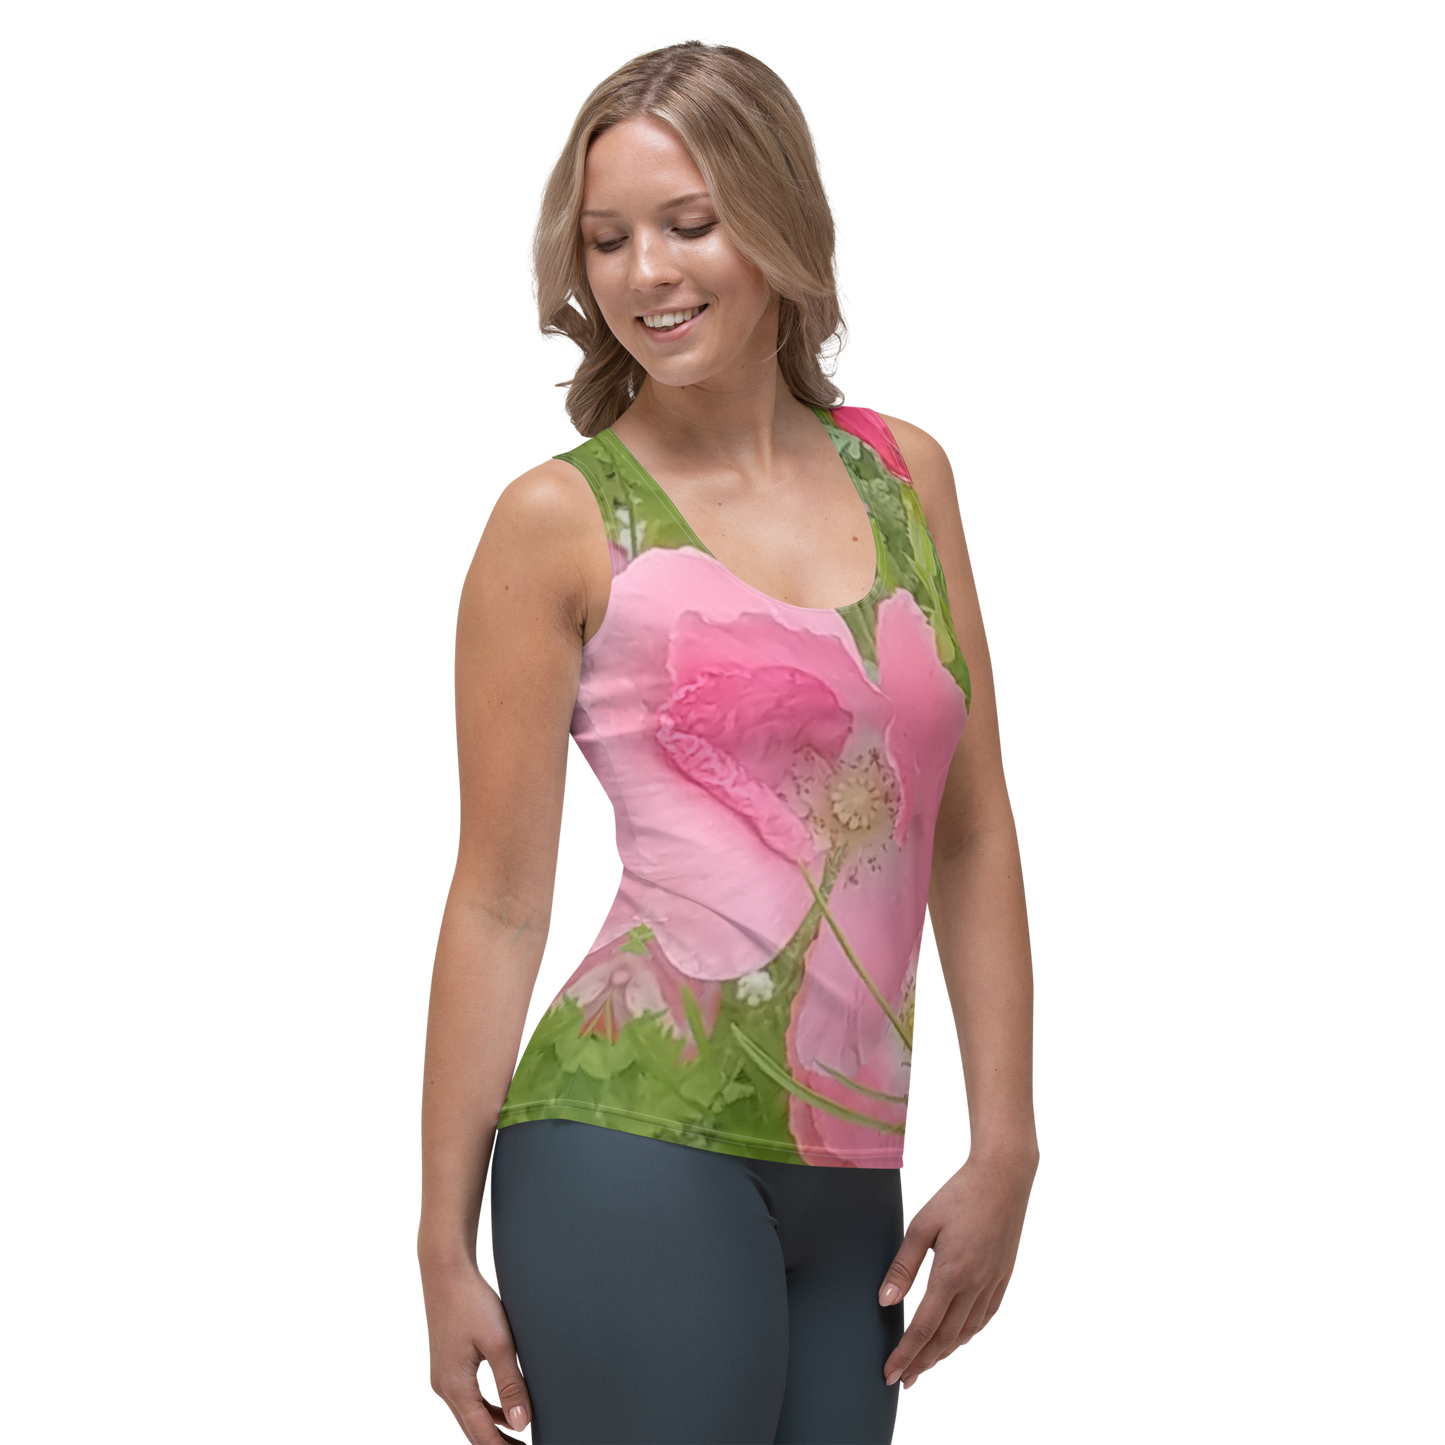 The FLOWER LOVE Collection - "Pretty Pink Poppies" Design Tank Top